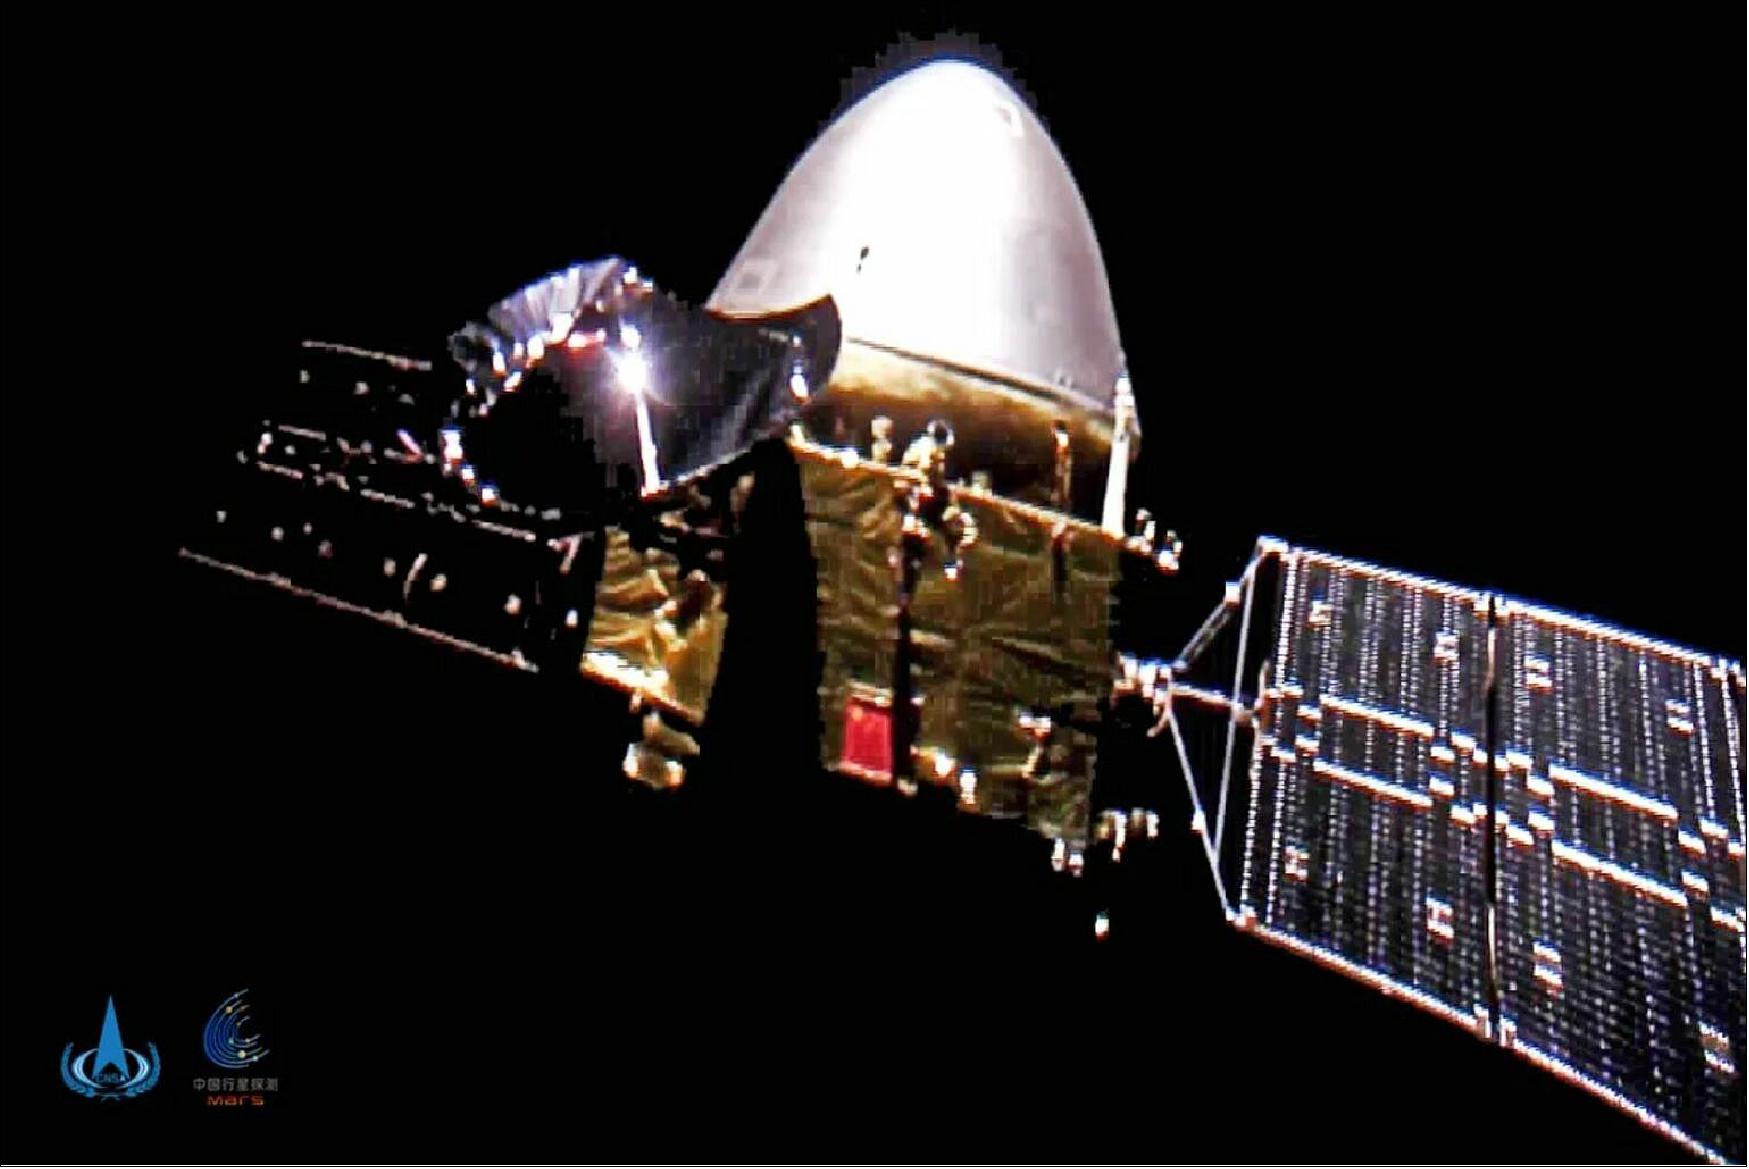 Figure 27: Tianwen-1 in deep space in October 2020, imaged by a detached camera (image credit: CNSA)